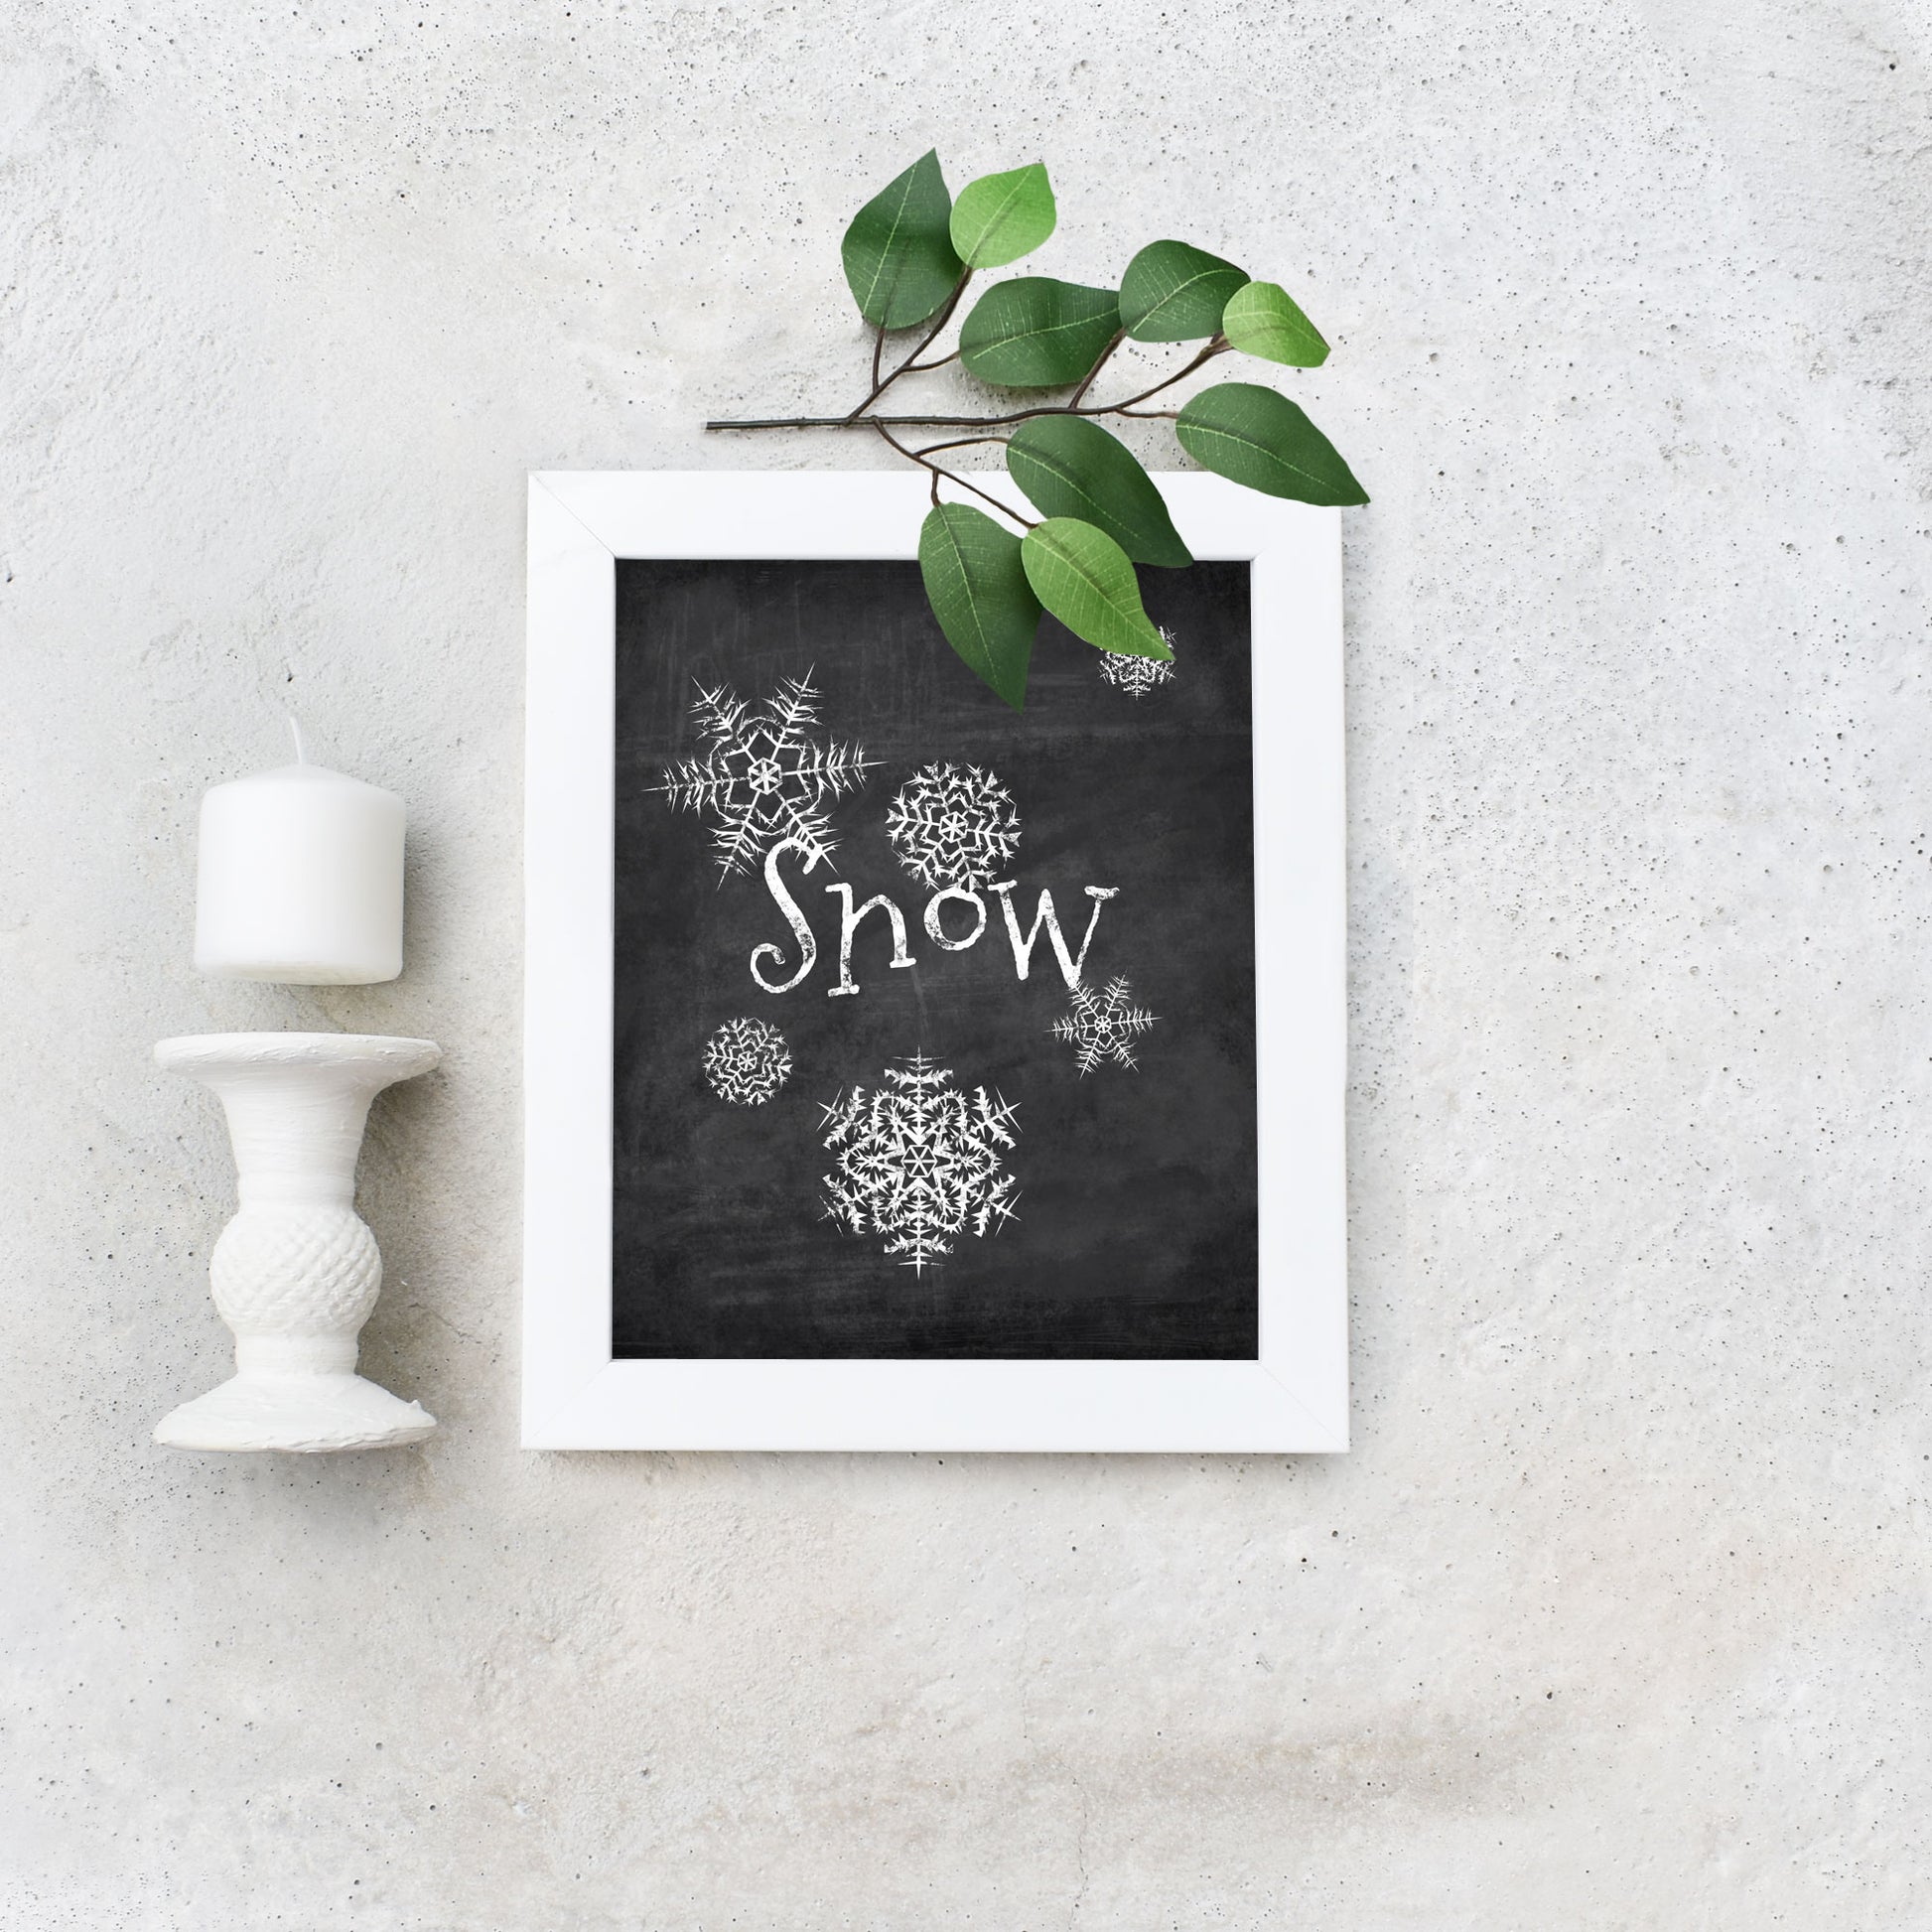 Easy Printable Distressed Snow Chalkboard Art by Playful Pixie Studio